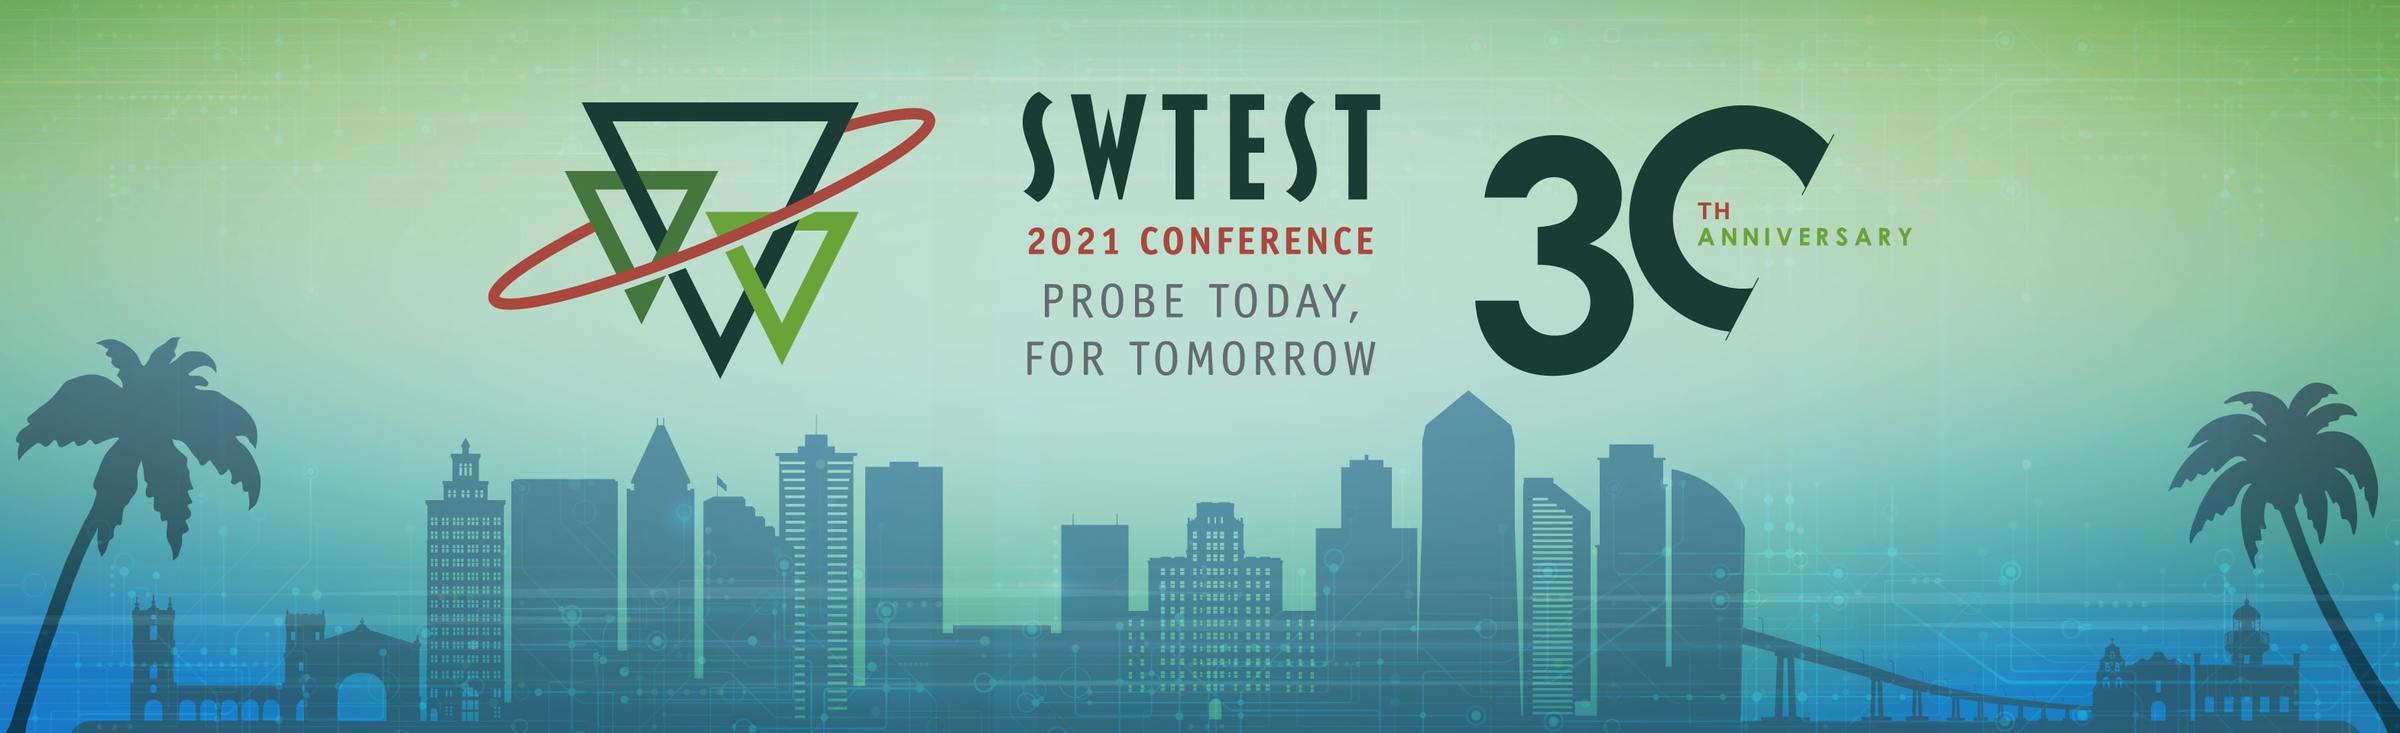 2021 SWTest Conference